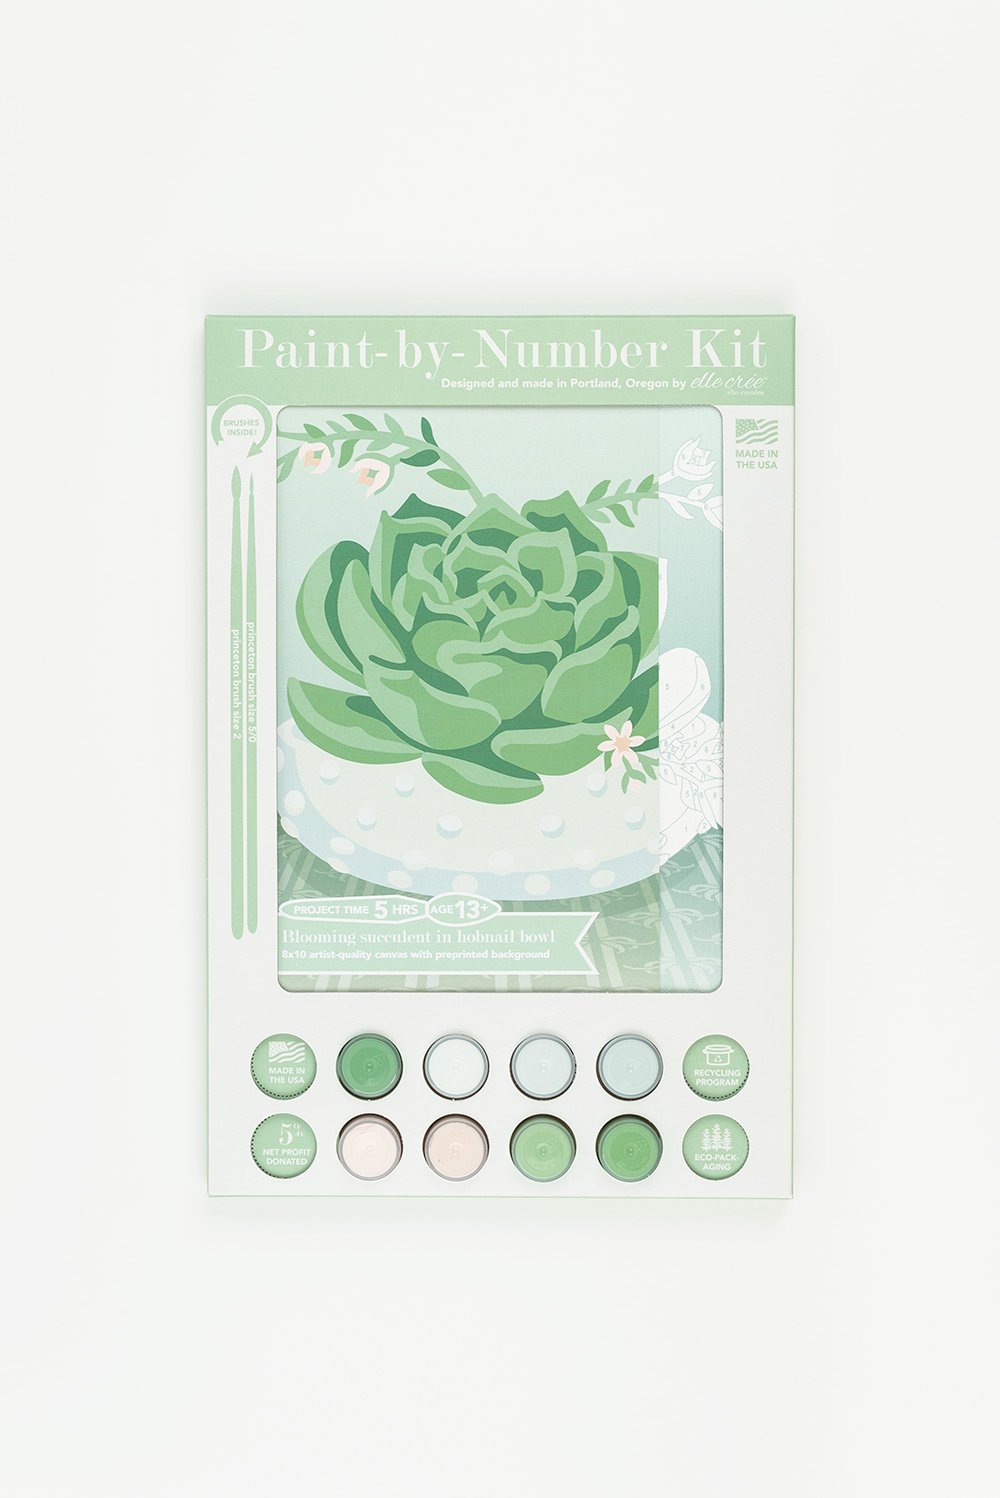 Elle Cree Blooming Succulent in Hobnail Bowl Paint-by-Number Kit